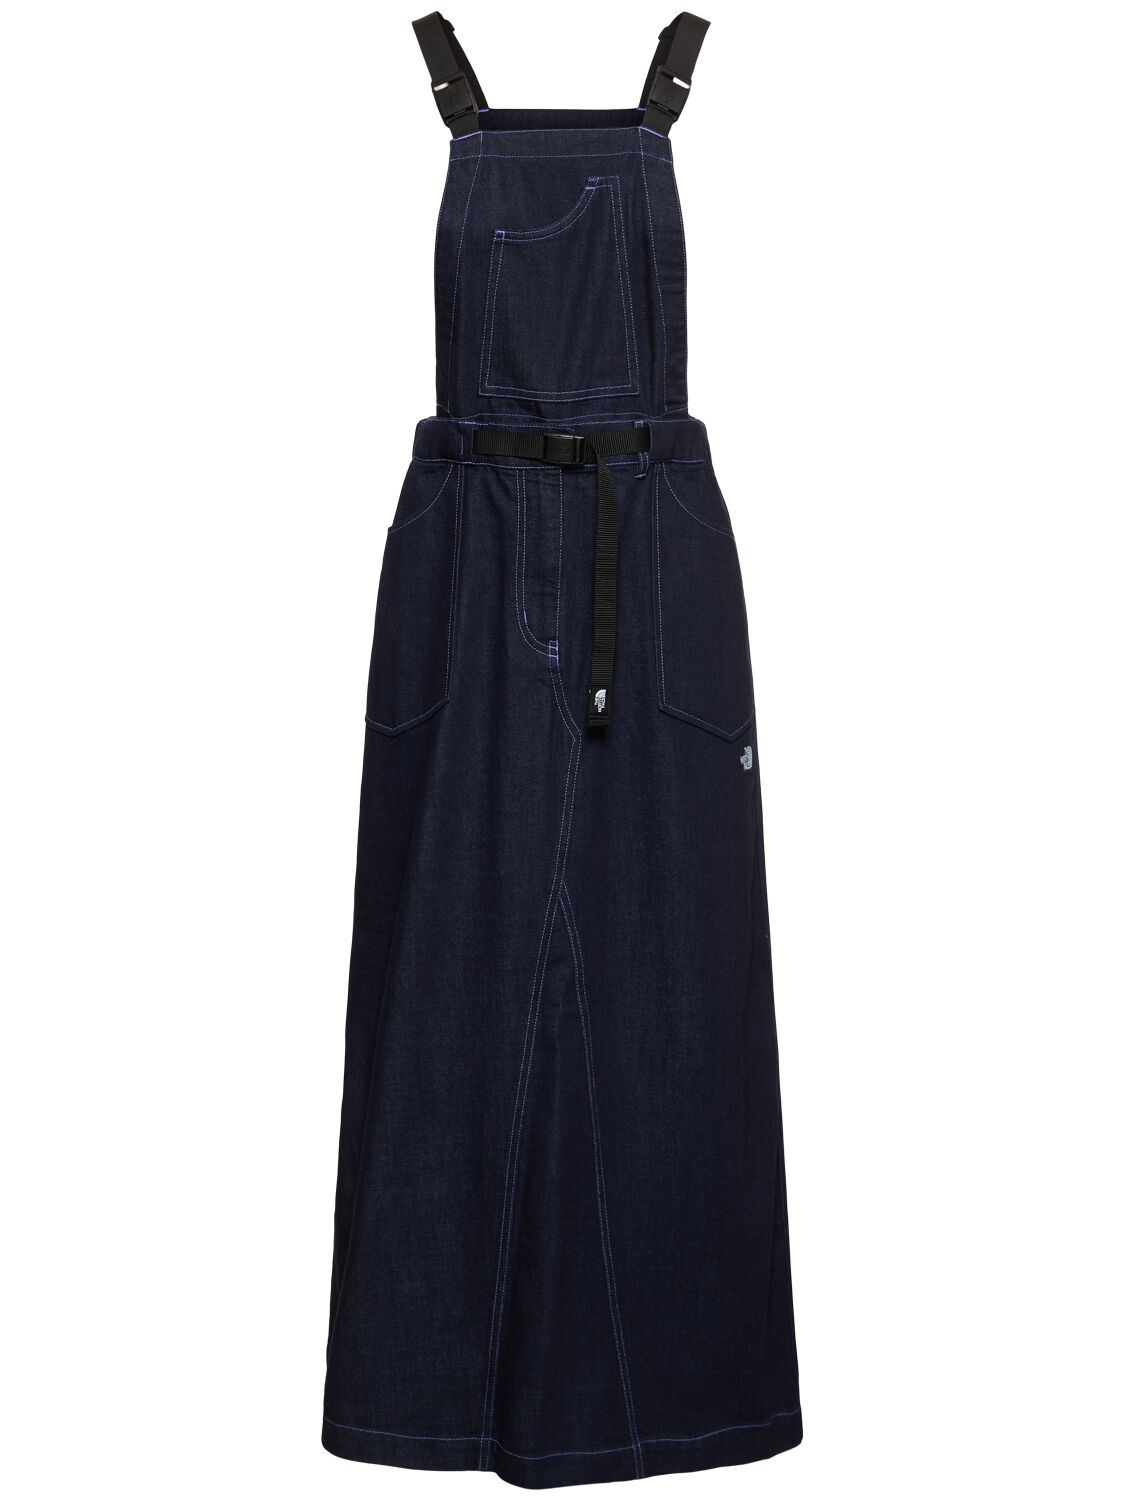 THE NORTH FACE DENIM OVERALL DRESS